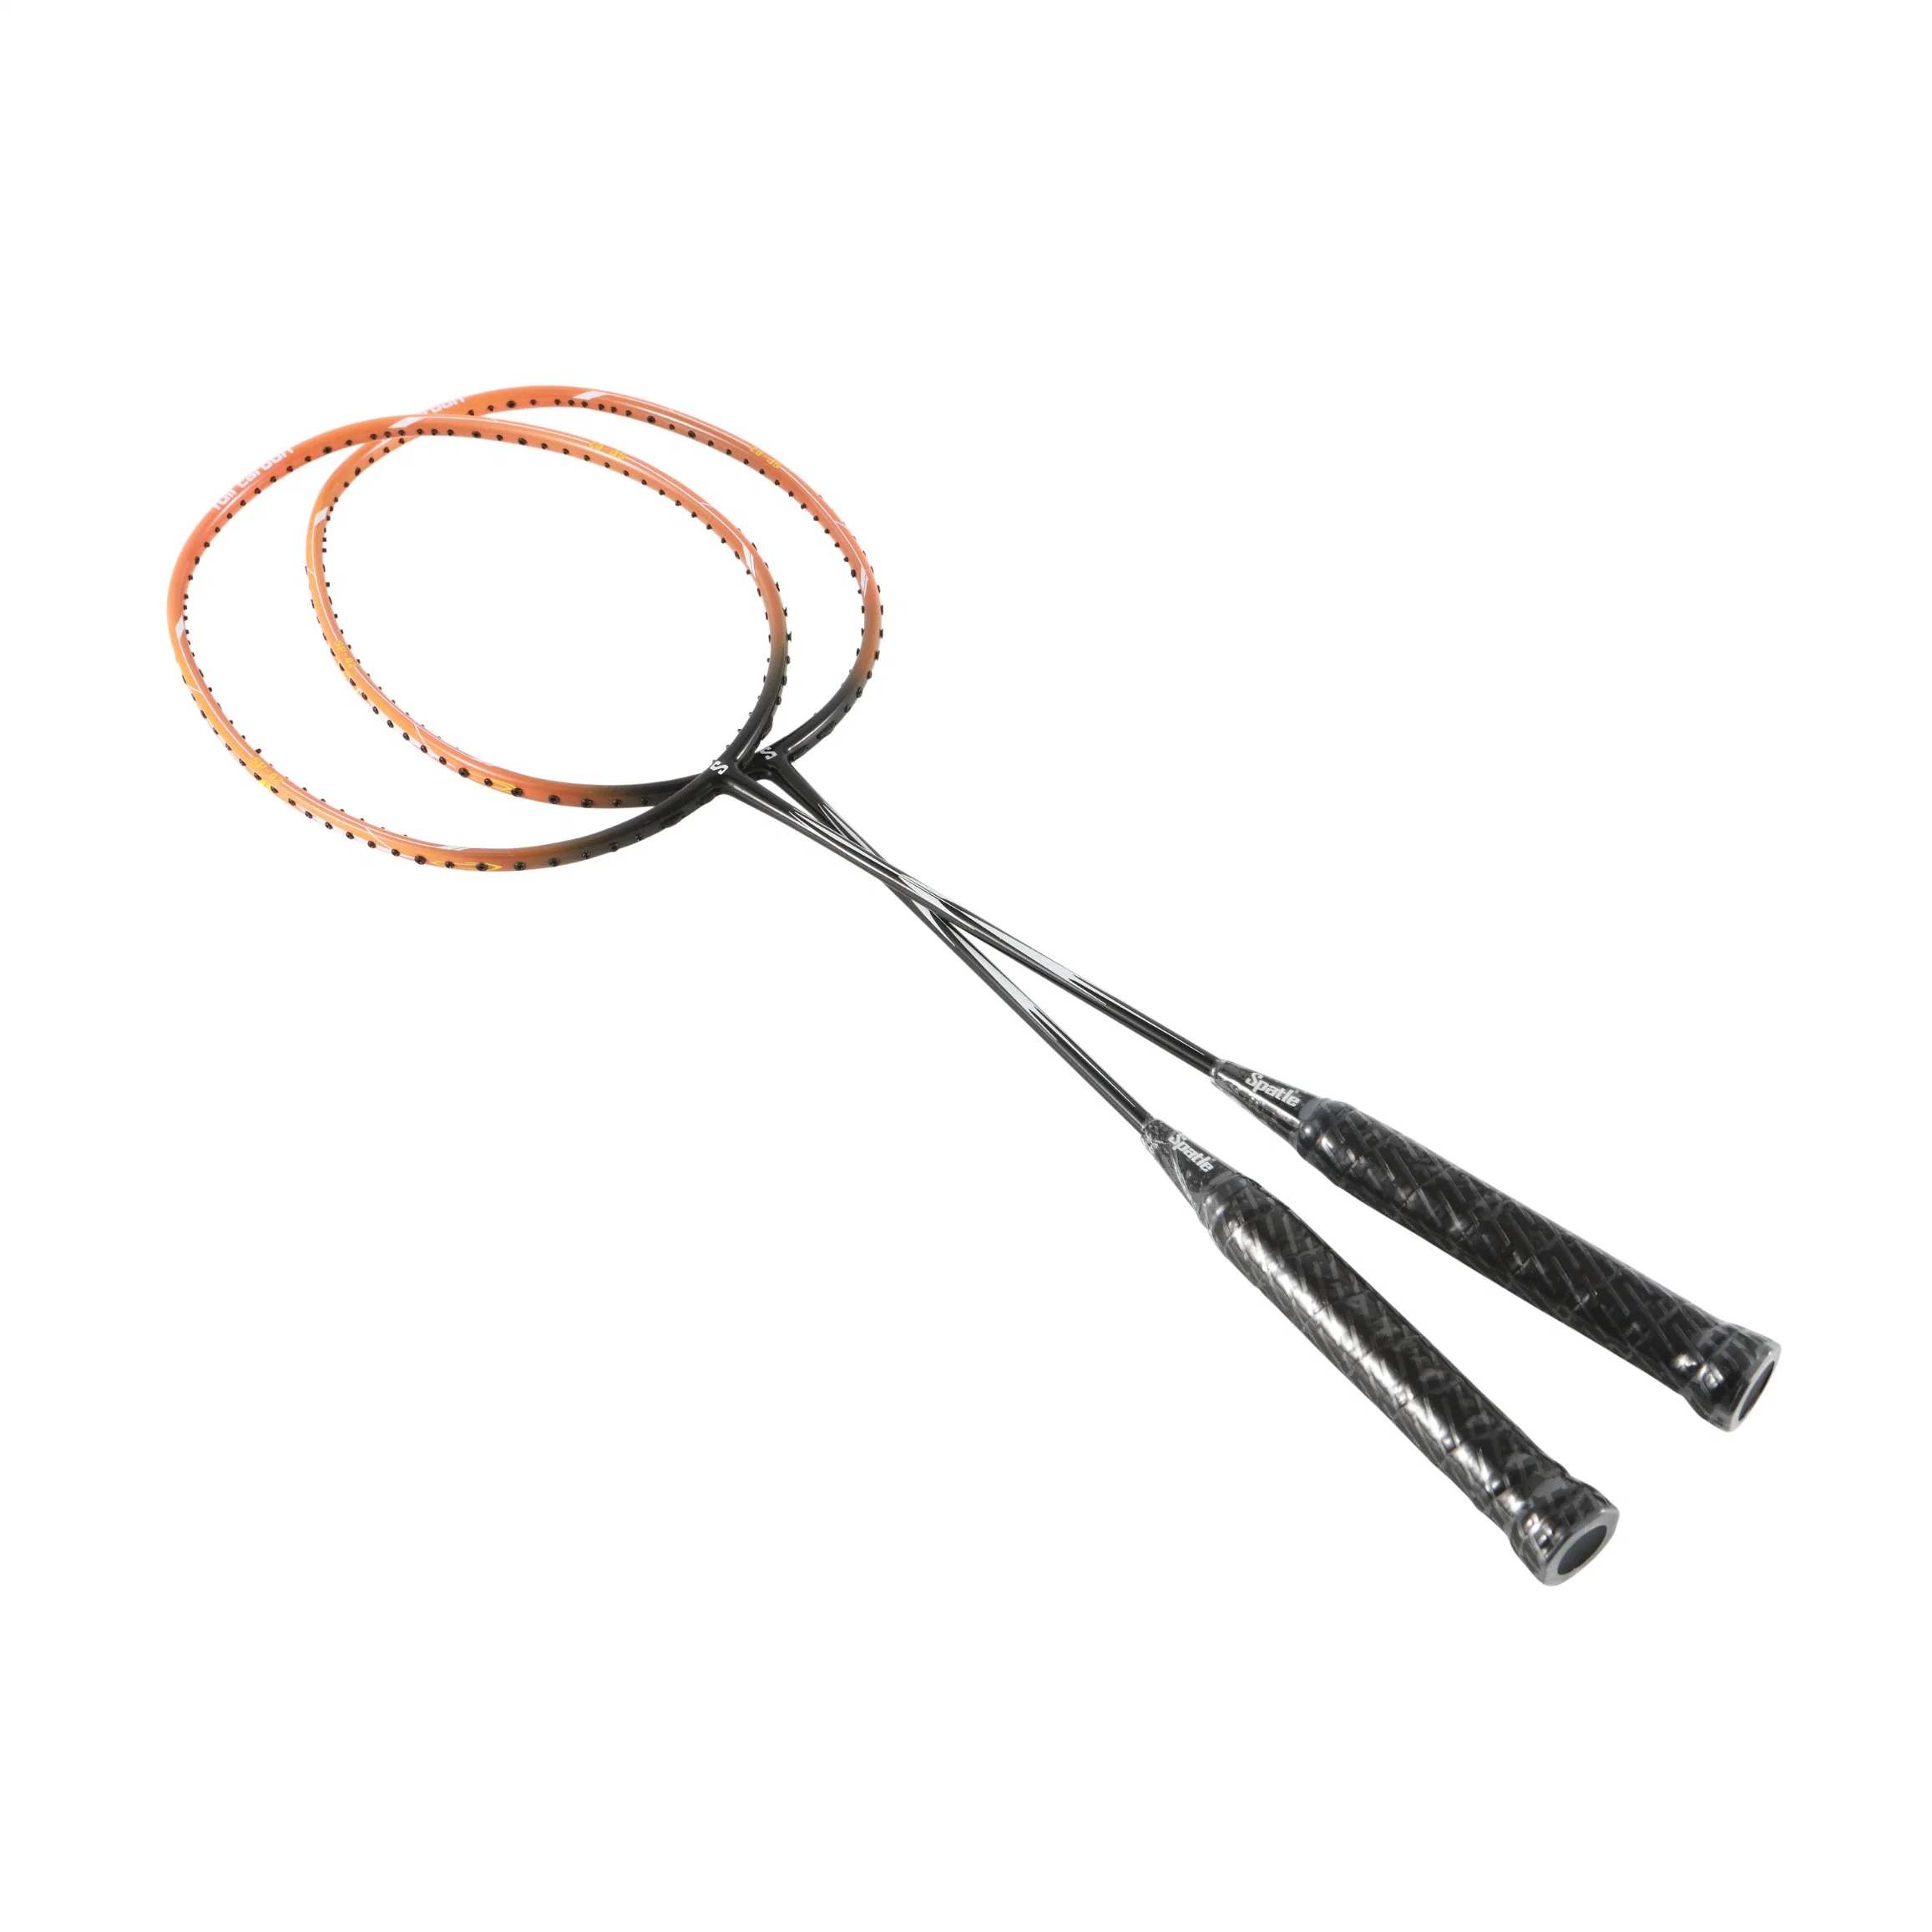 Personalized Badminton Racket with Carbon Fiber for Outdoor Activities